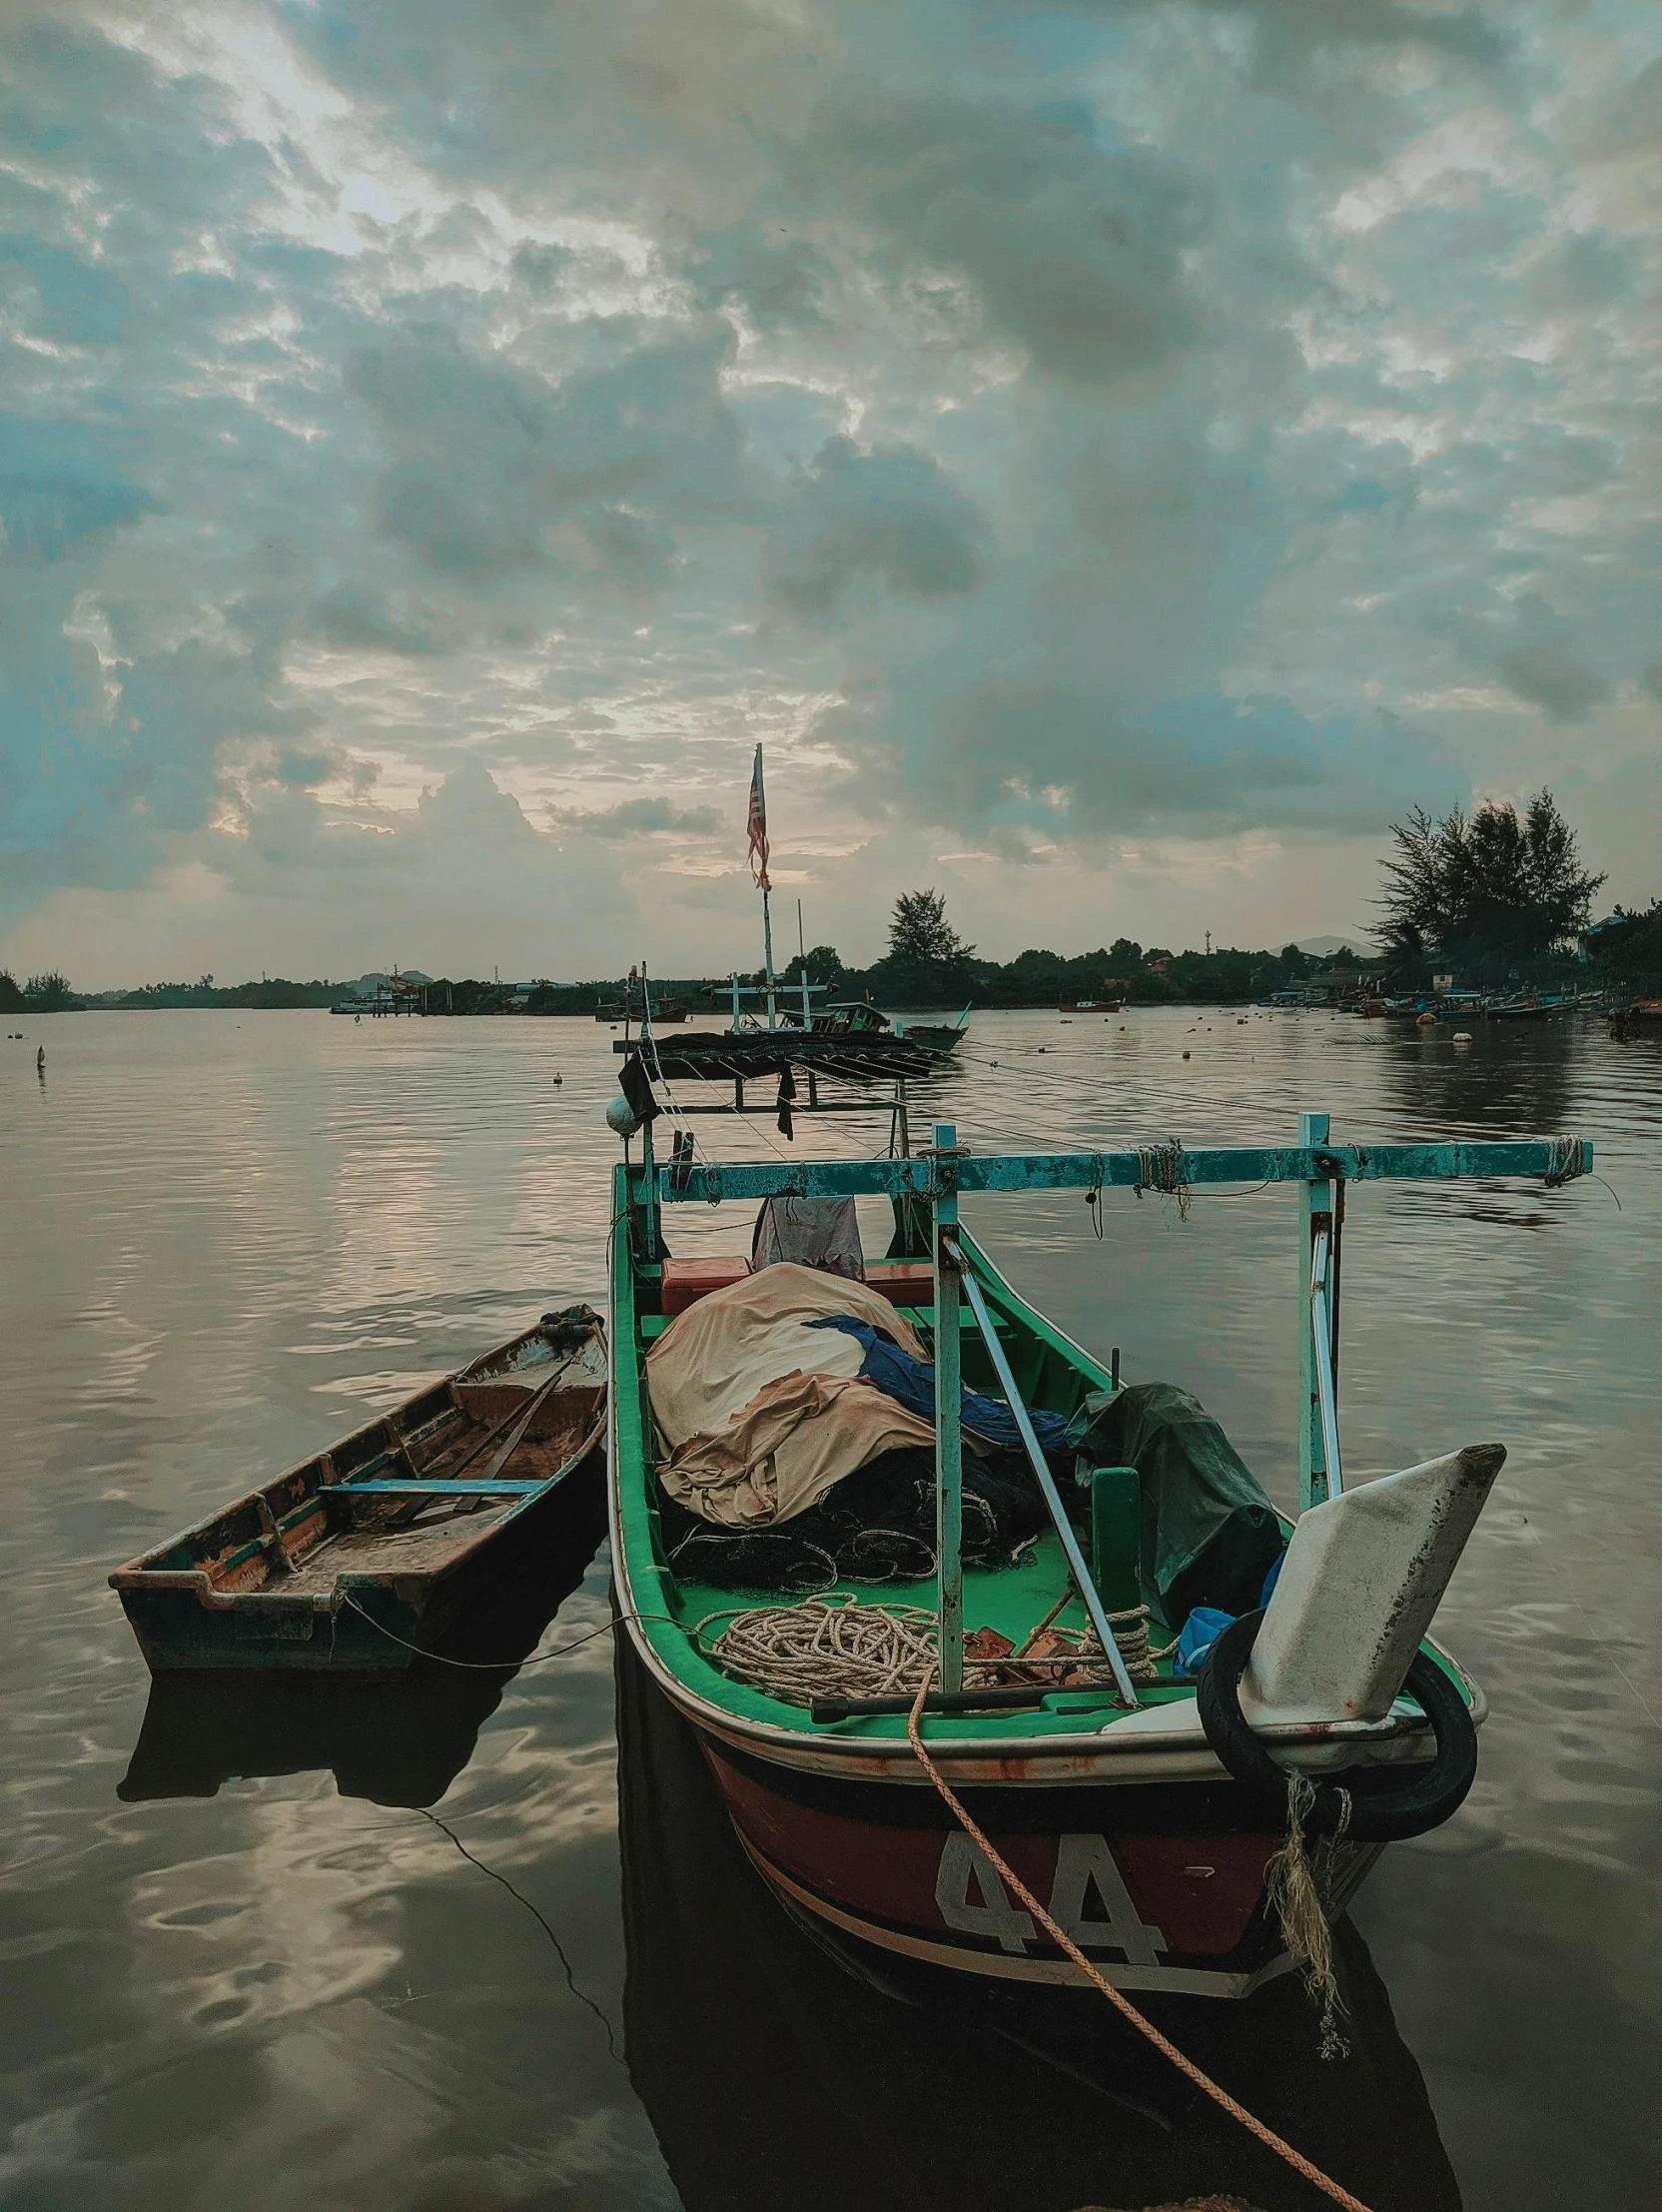 a couple of boats sitting on top of a body of water, a picture, pexels contest winner, sumatraism, moody sky at the back, album art, fishing town, photo on iphone